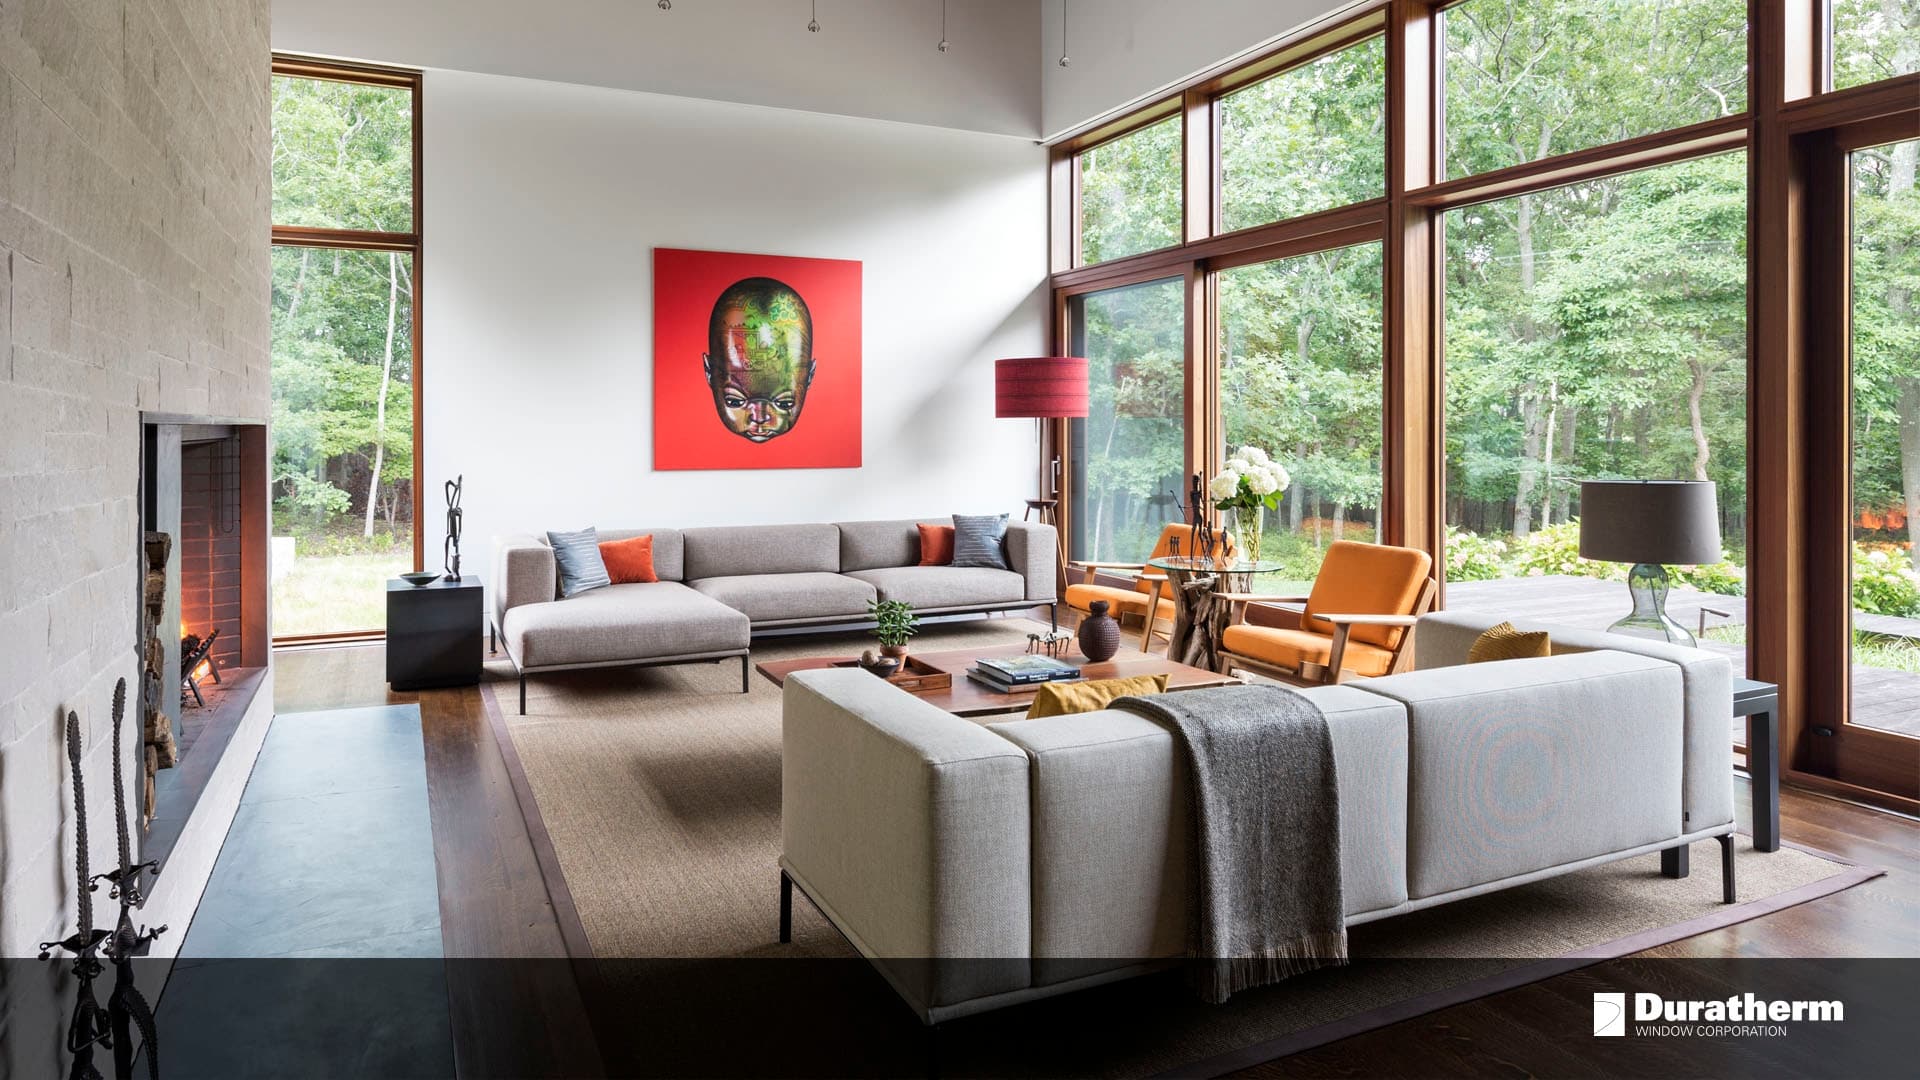 window-walled living room with a large piece of art above the couch